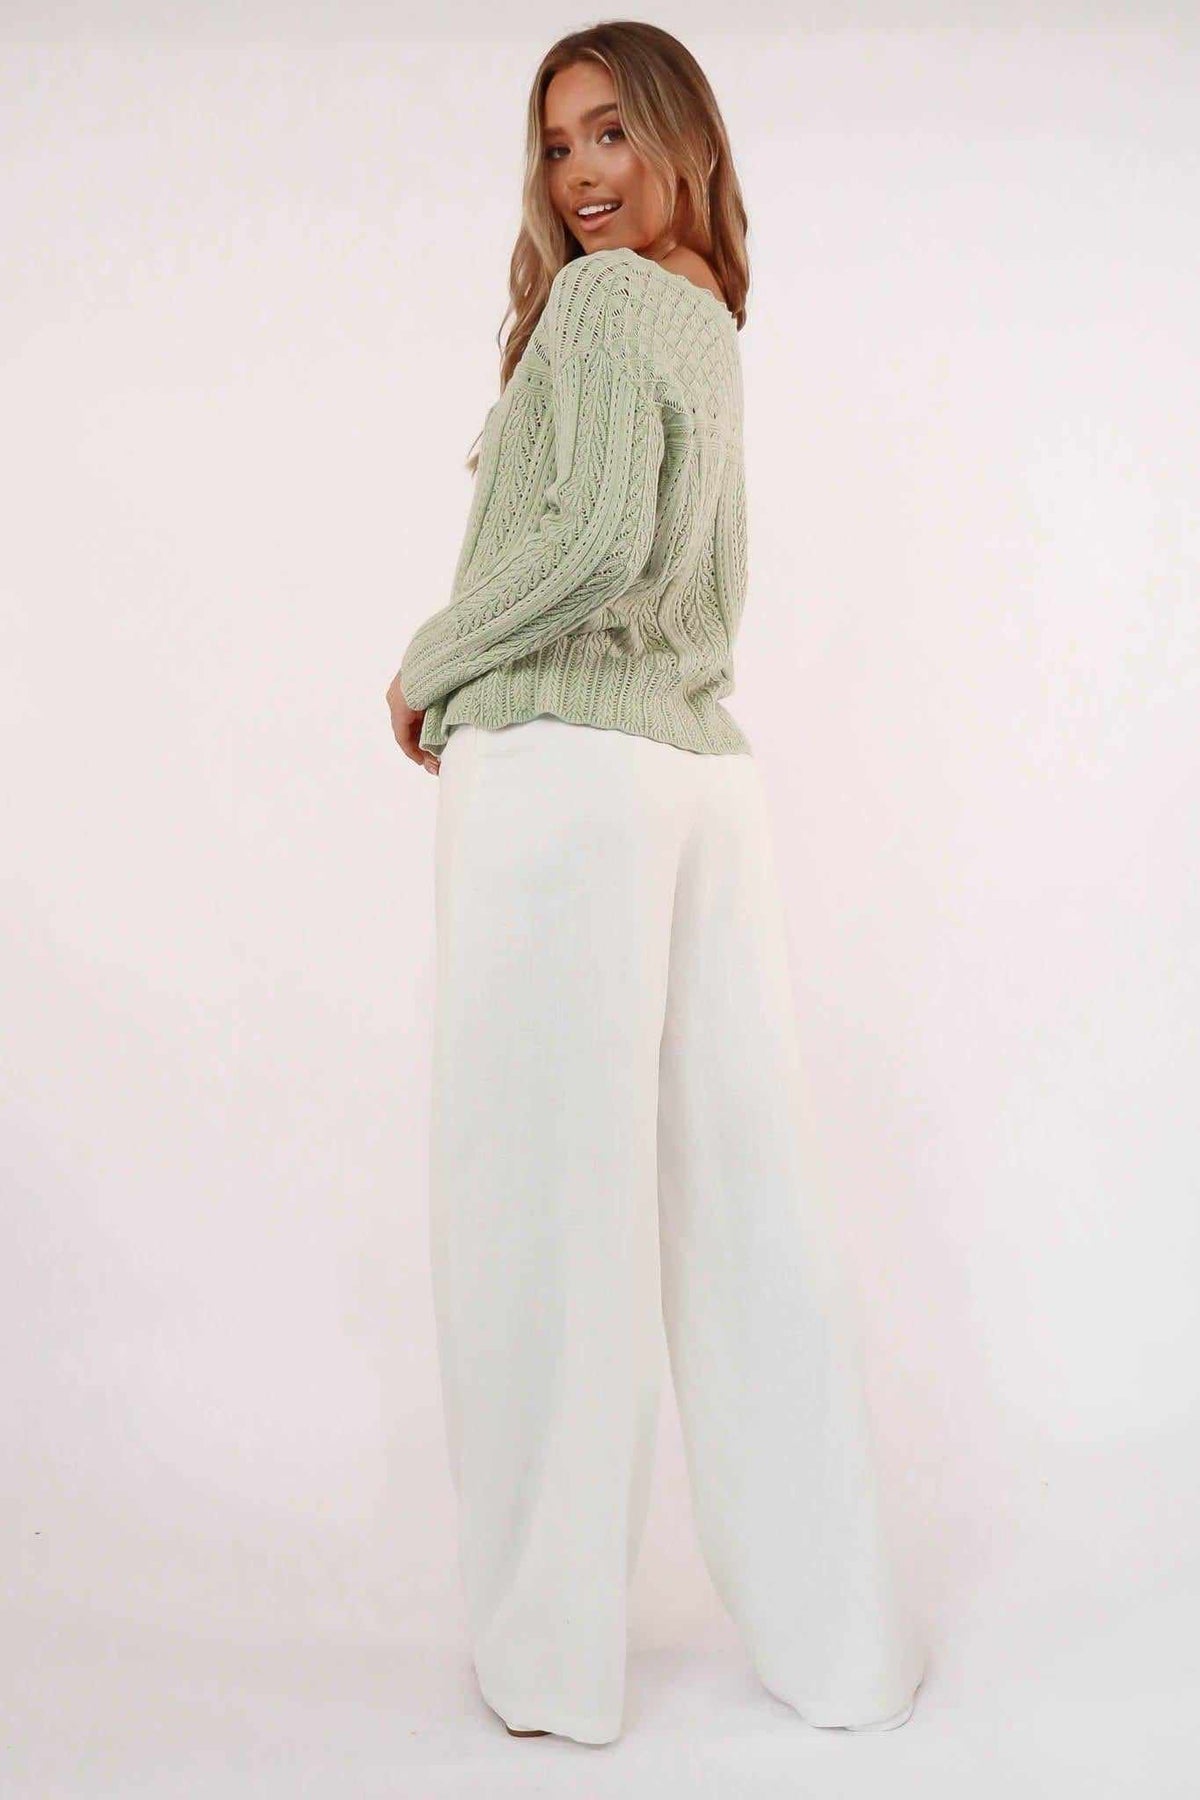 Lornia Top, COTTON, GREEN, LONG SLEEVE, TOP, TOPS, Our New Lornia Top Is Now Only $61.00 Exclusive At Mishkah, Our New Lornia Top is now only $61.00-We Have The Latest Women&#39;s Tops @ Mishkah Online Fashion Boutique-MISHKAH